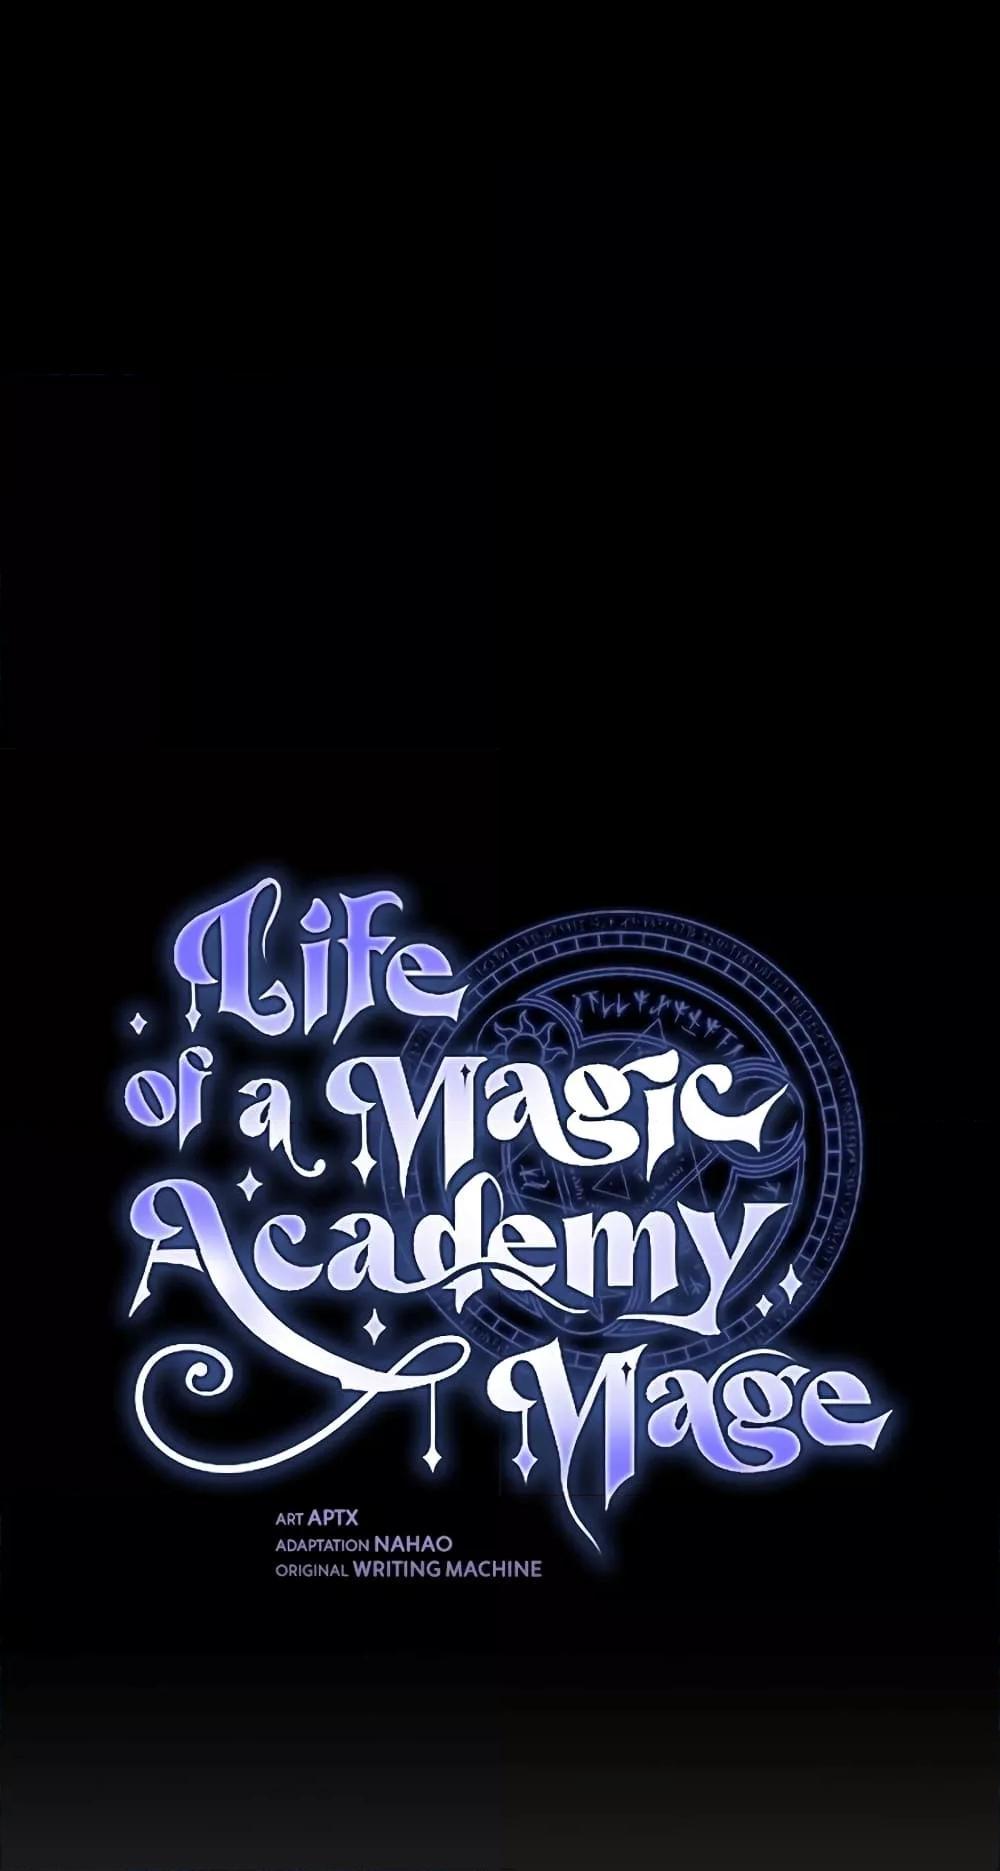 Life of a Magic Academy Mage 35 08